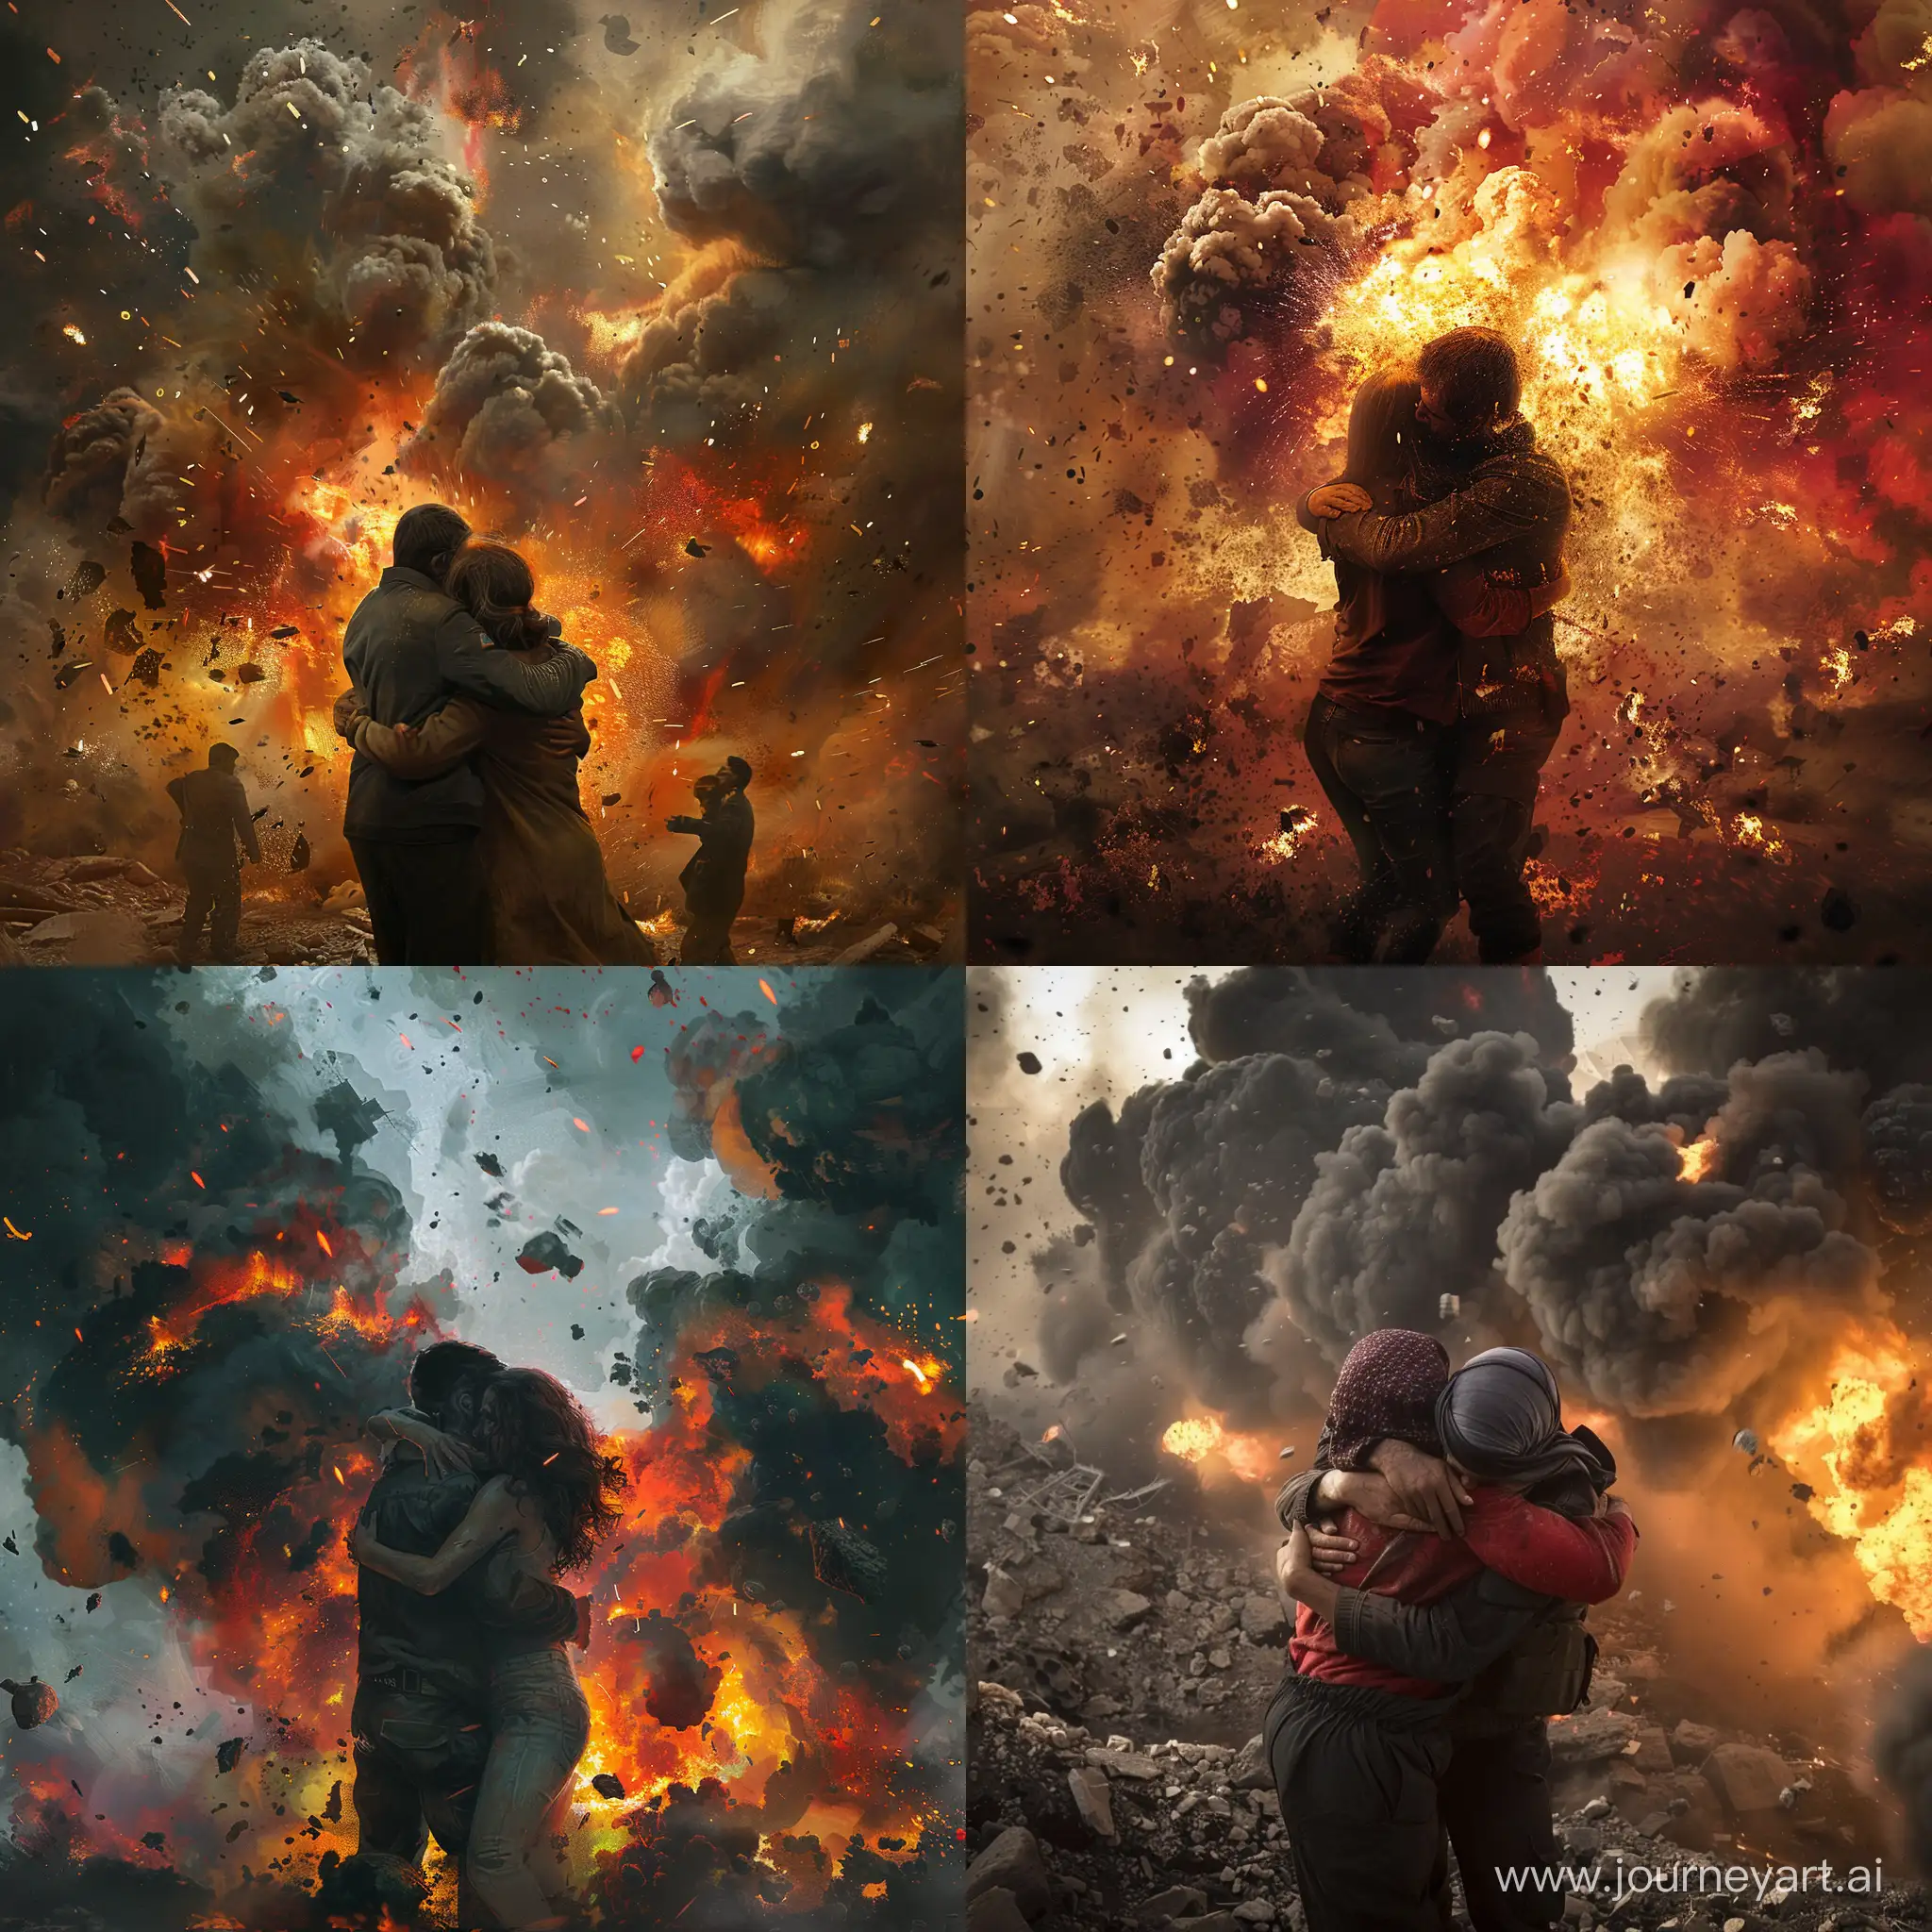 Embracing-Love-Amidst-Explosions-Powerful-Human-Connection